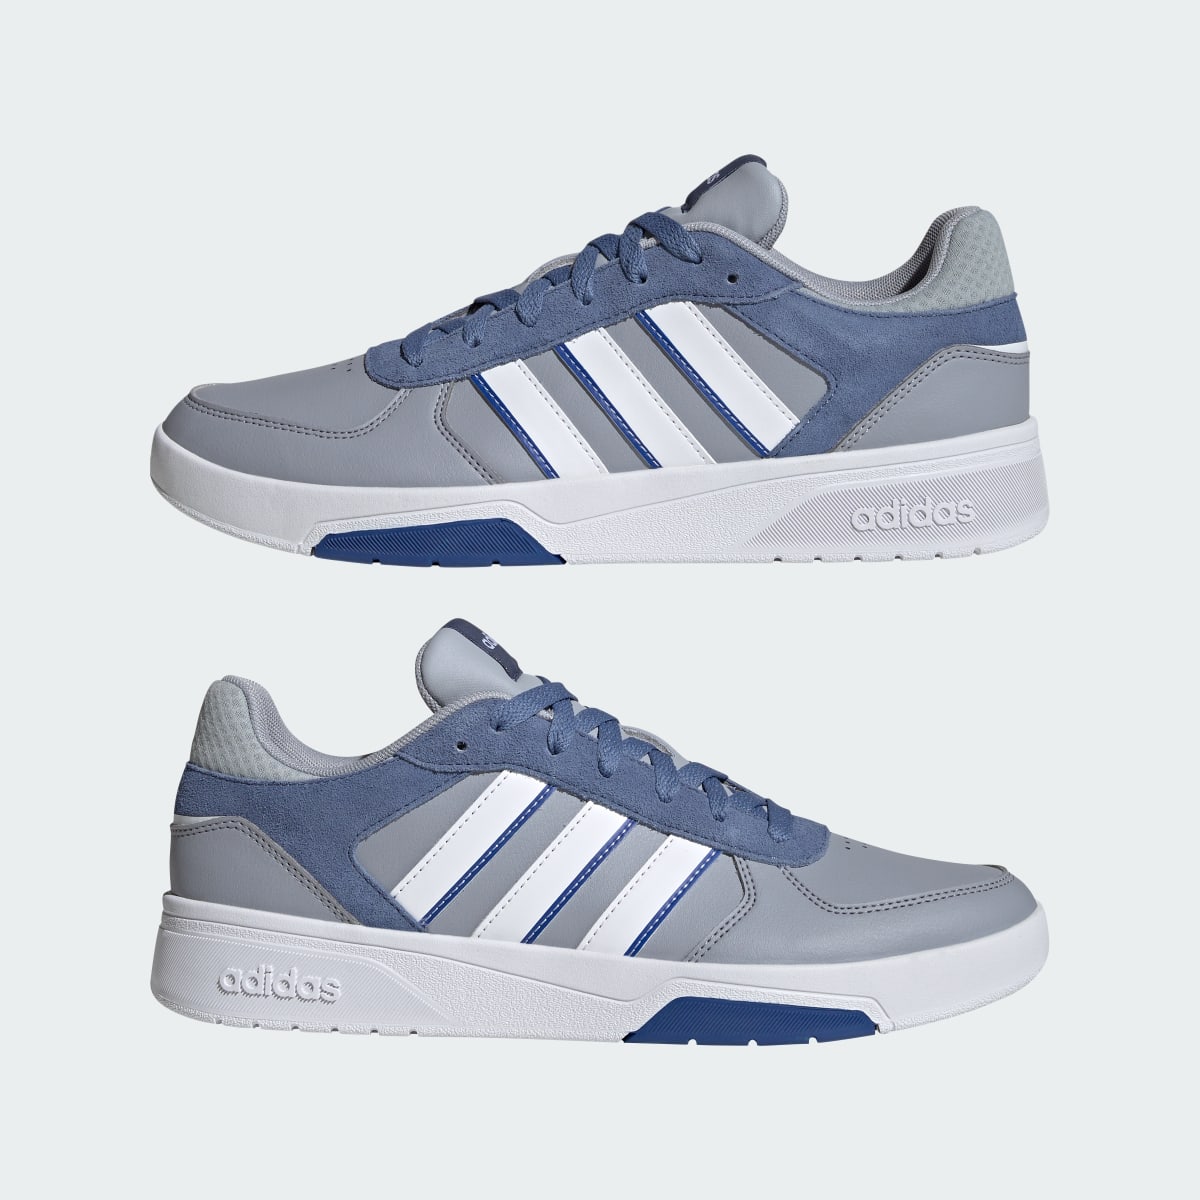 Adidas Courtbeat Shoes. 8